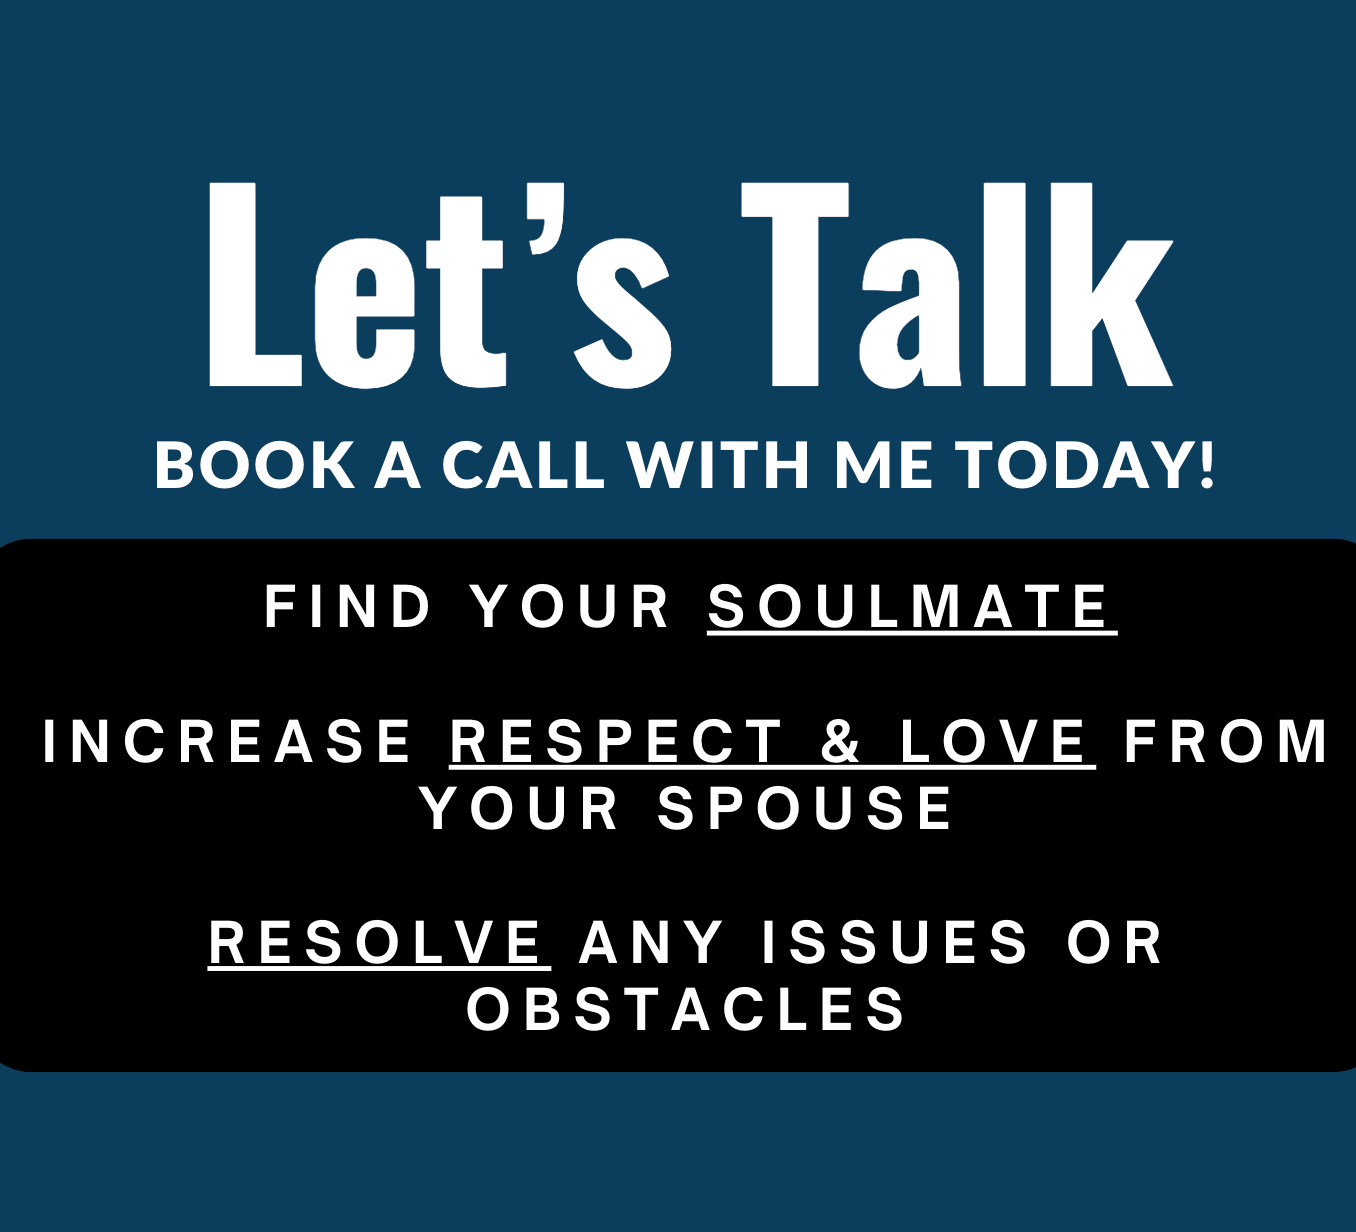 This Call is For You, Whether You're Married or Single, Benefits Include: